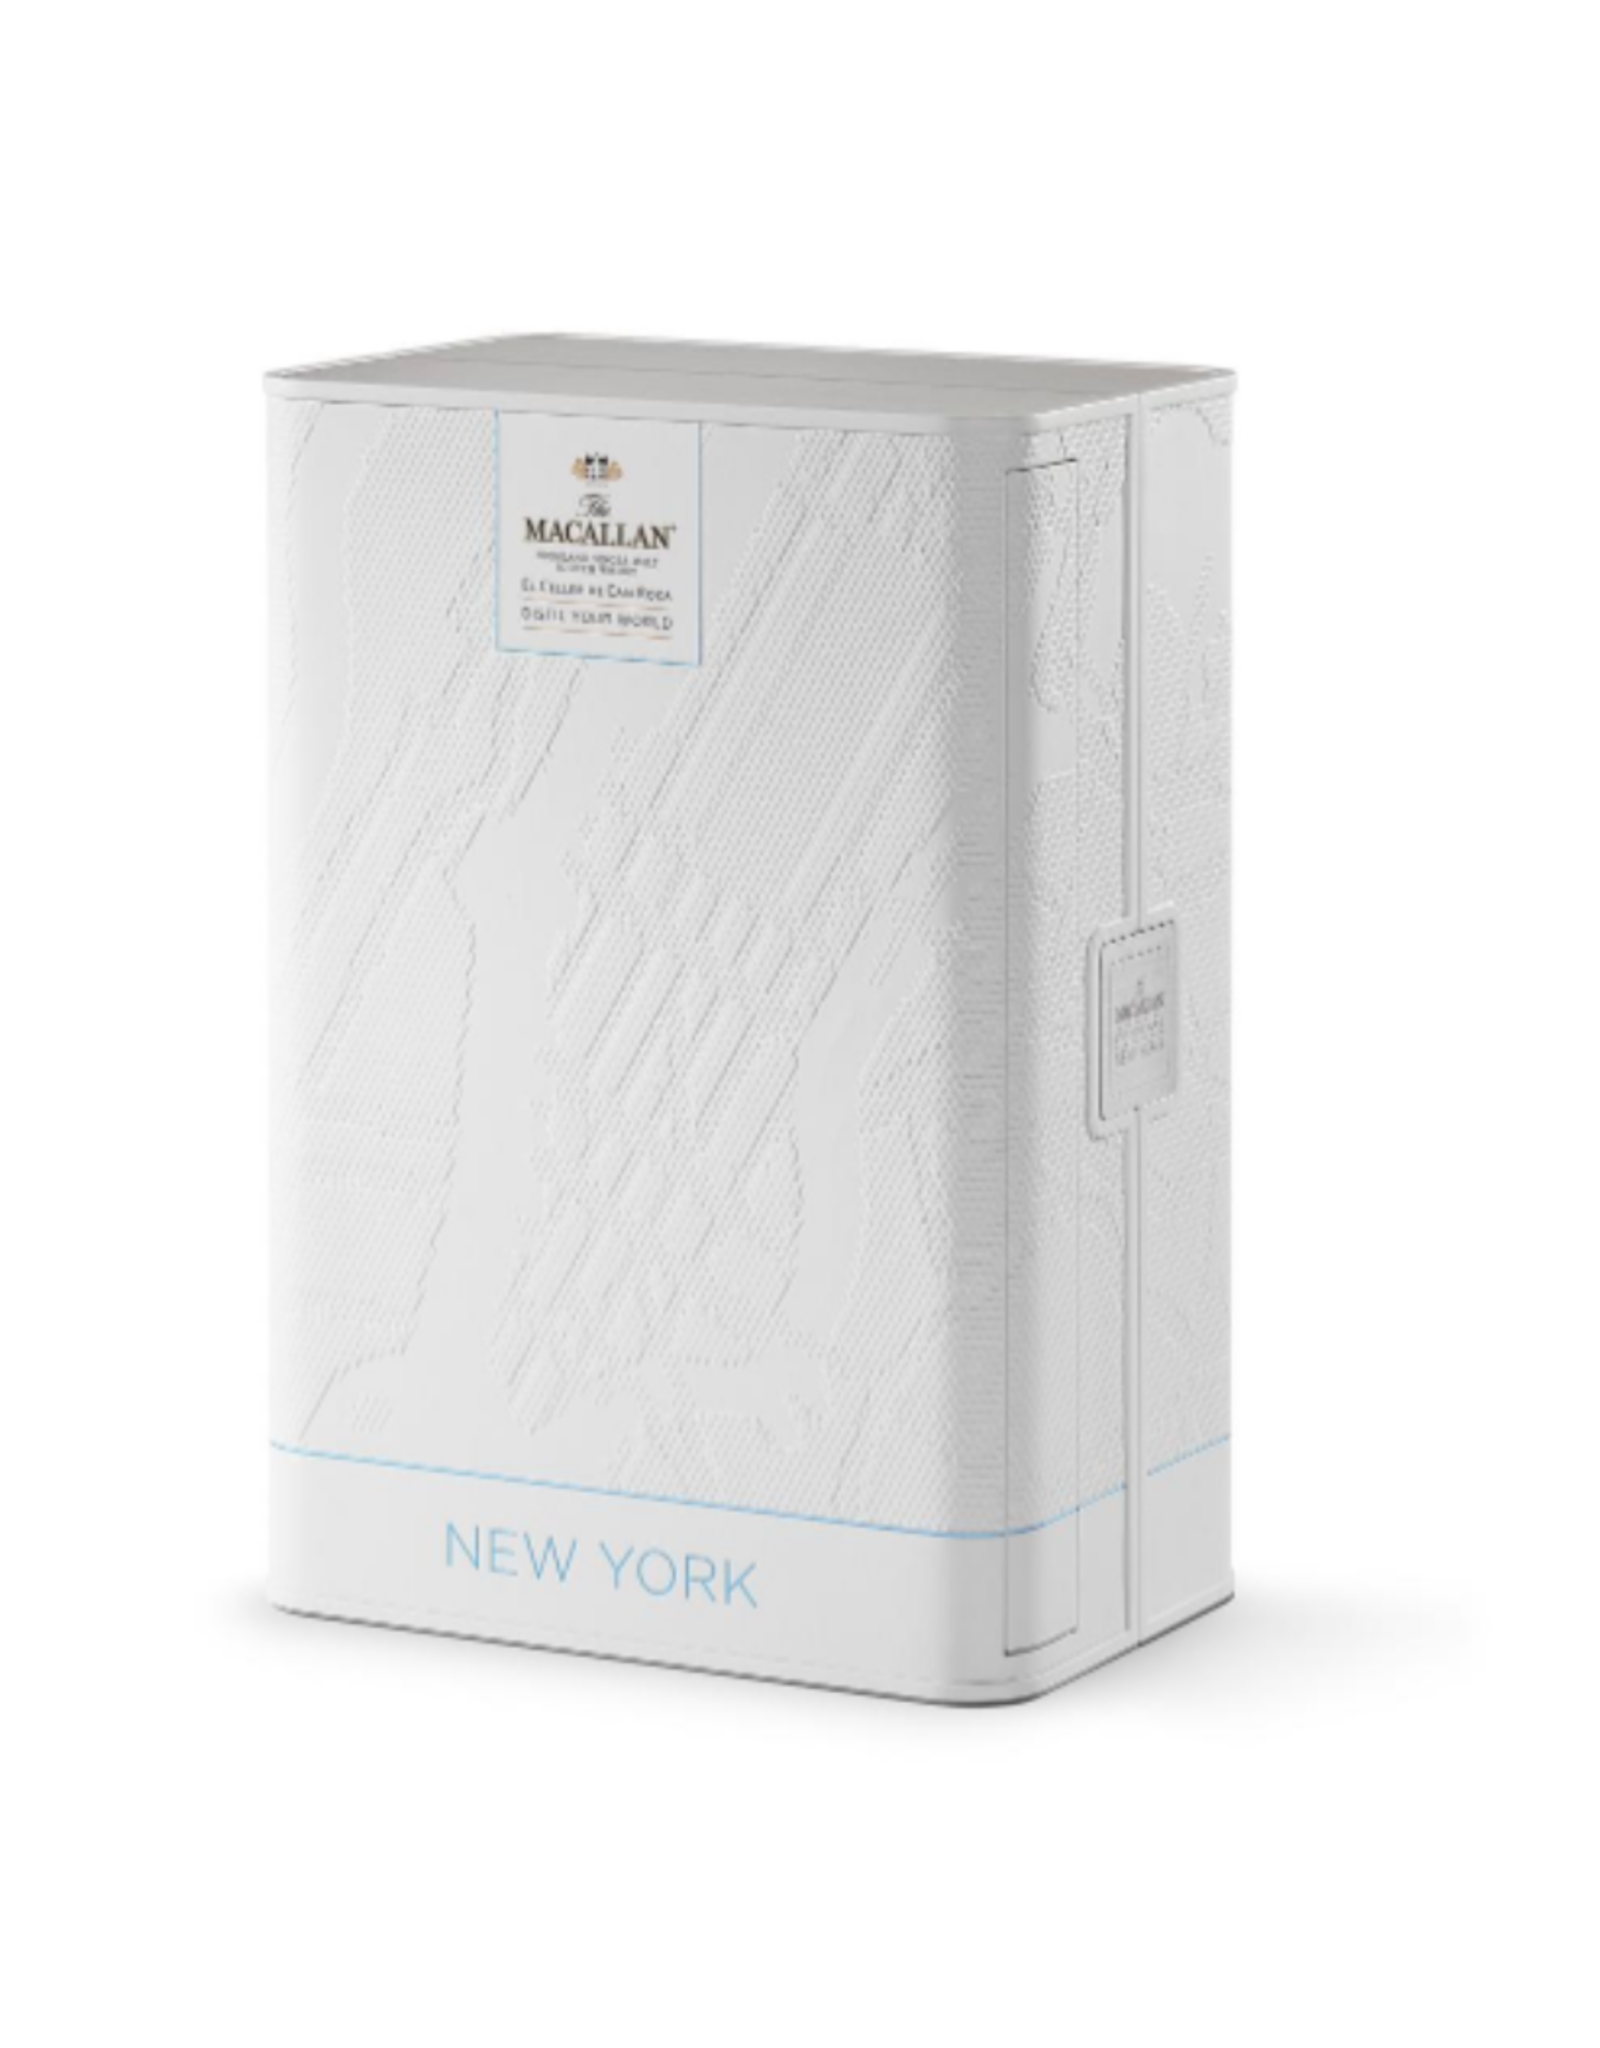 The Macallan The Macallan 'Distil Your World New York Limited Edition' Single Malt Scotch Whisky 